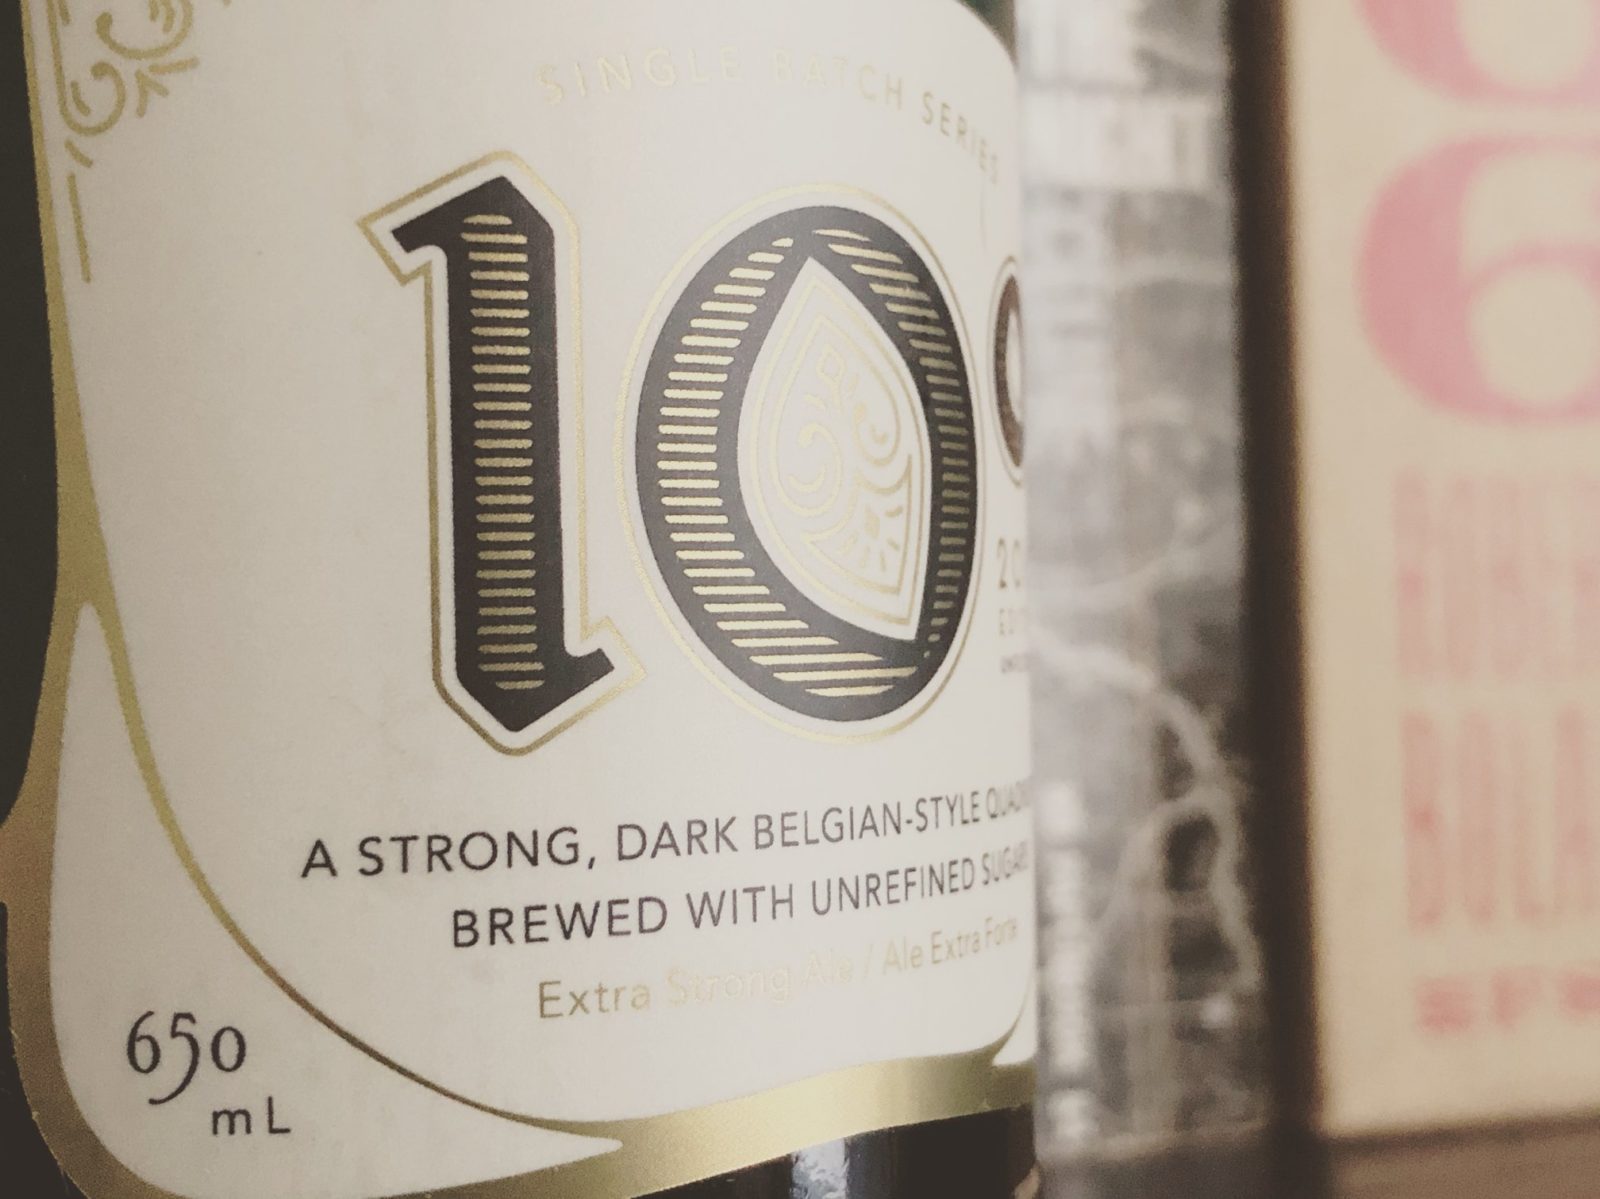 10˚ by Dageraad Brewing